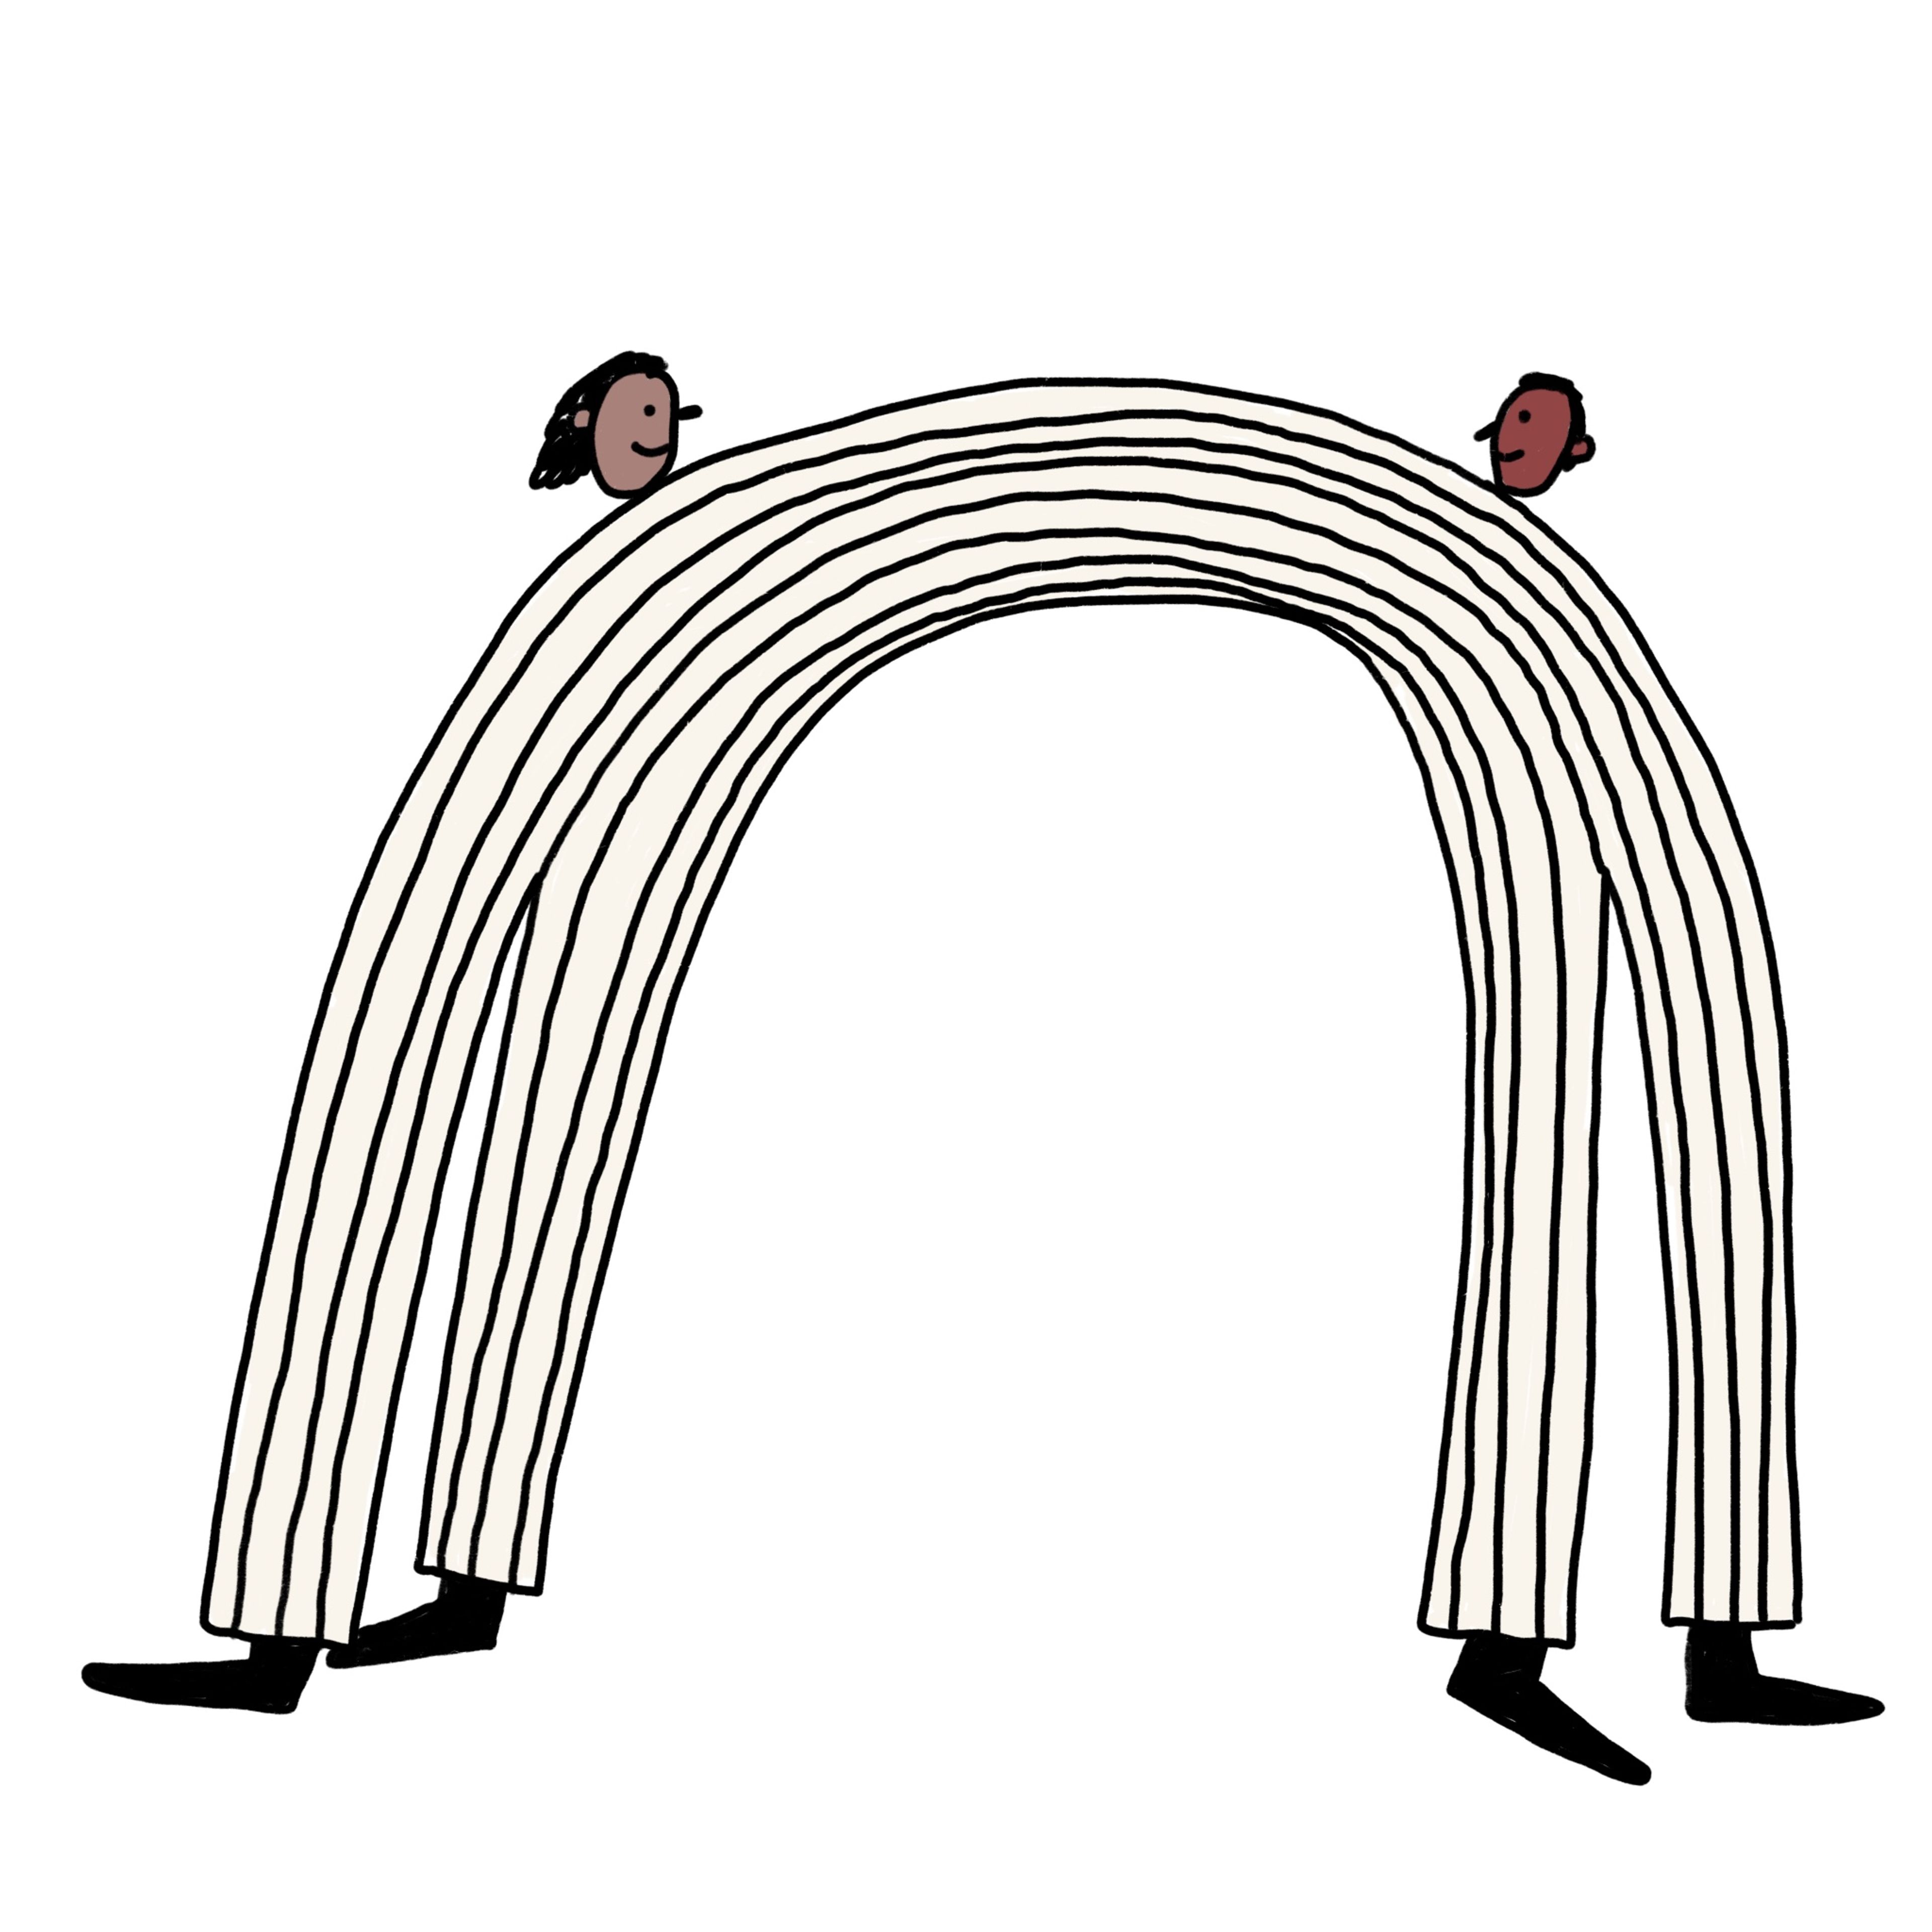 Illustration of two figures joint at the hip.